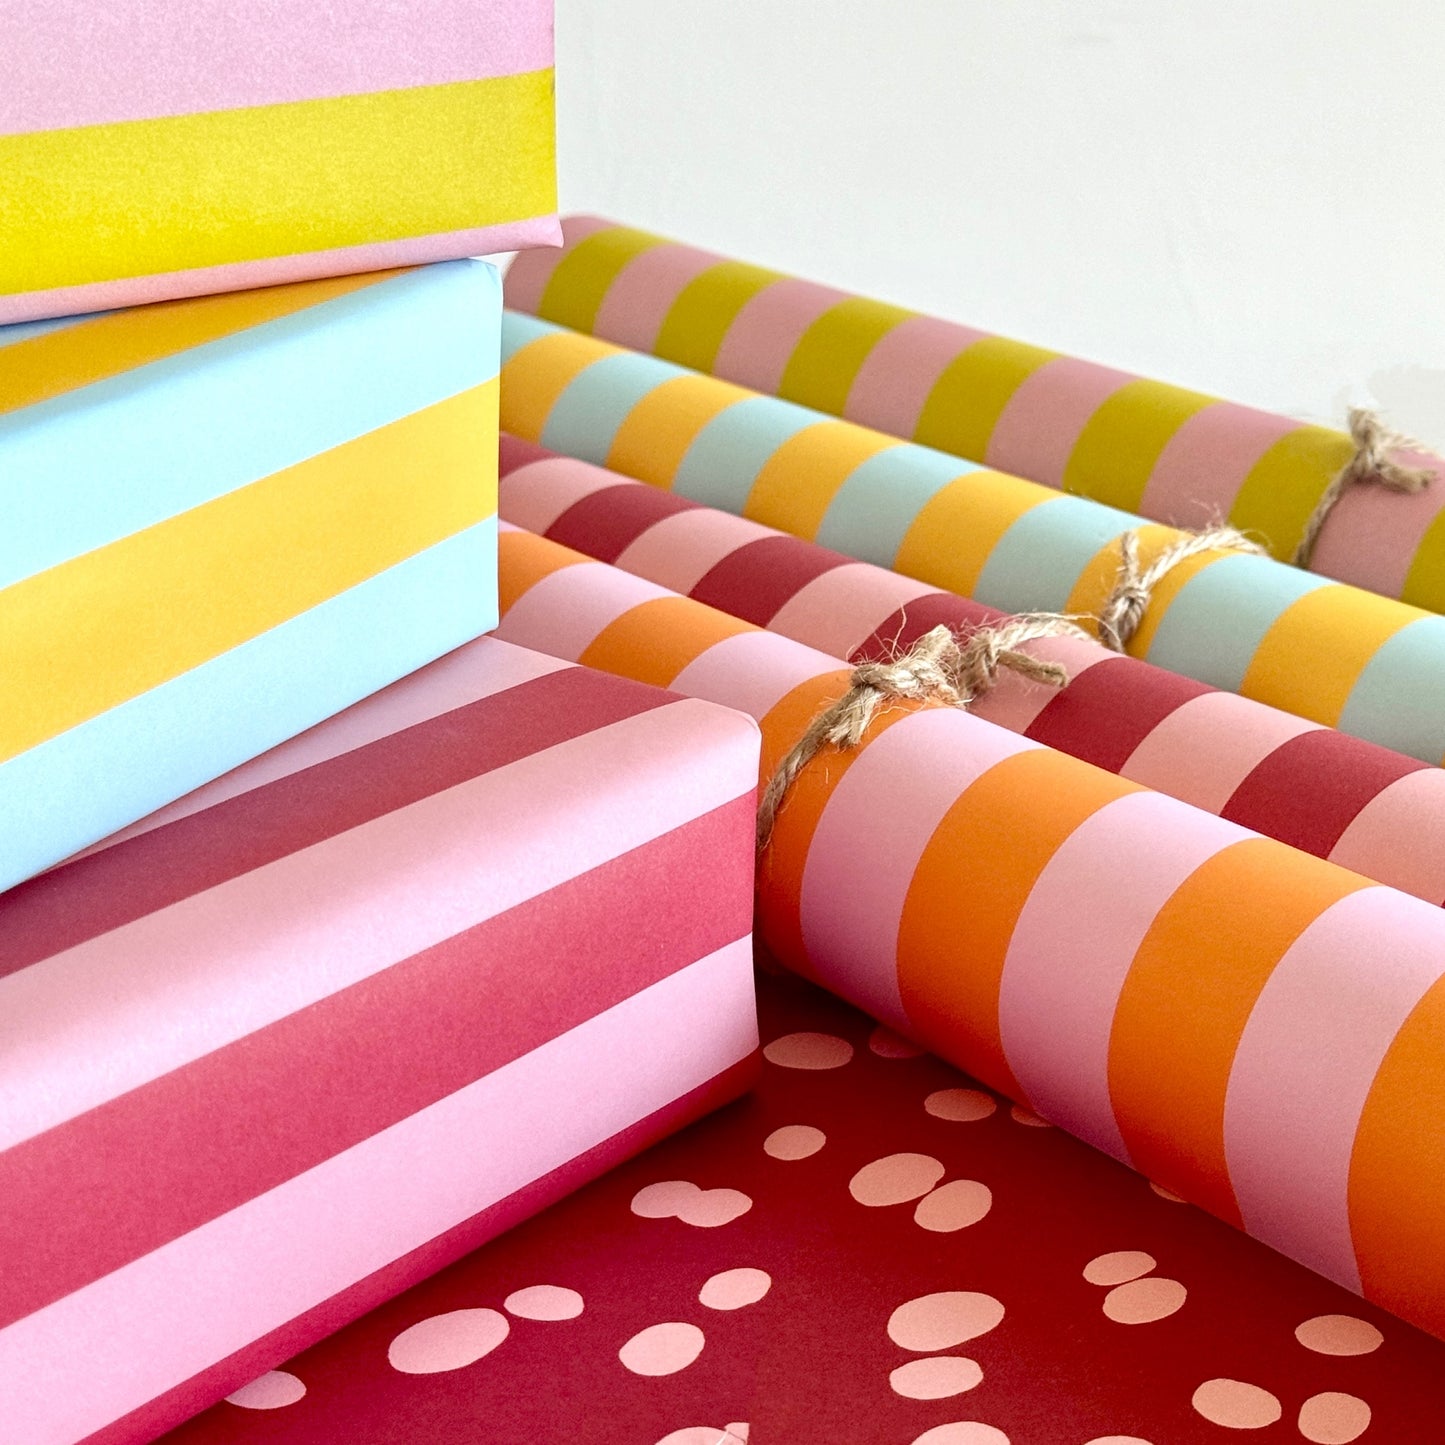 wide classic stripe wrapping paper in orange and pink by Heather Evelyn. Pictured rolled with other striped designs and a pile of presents